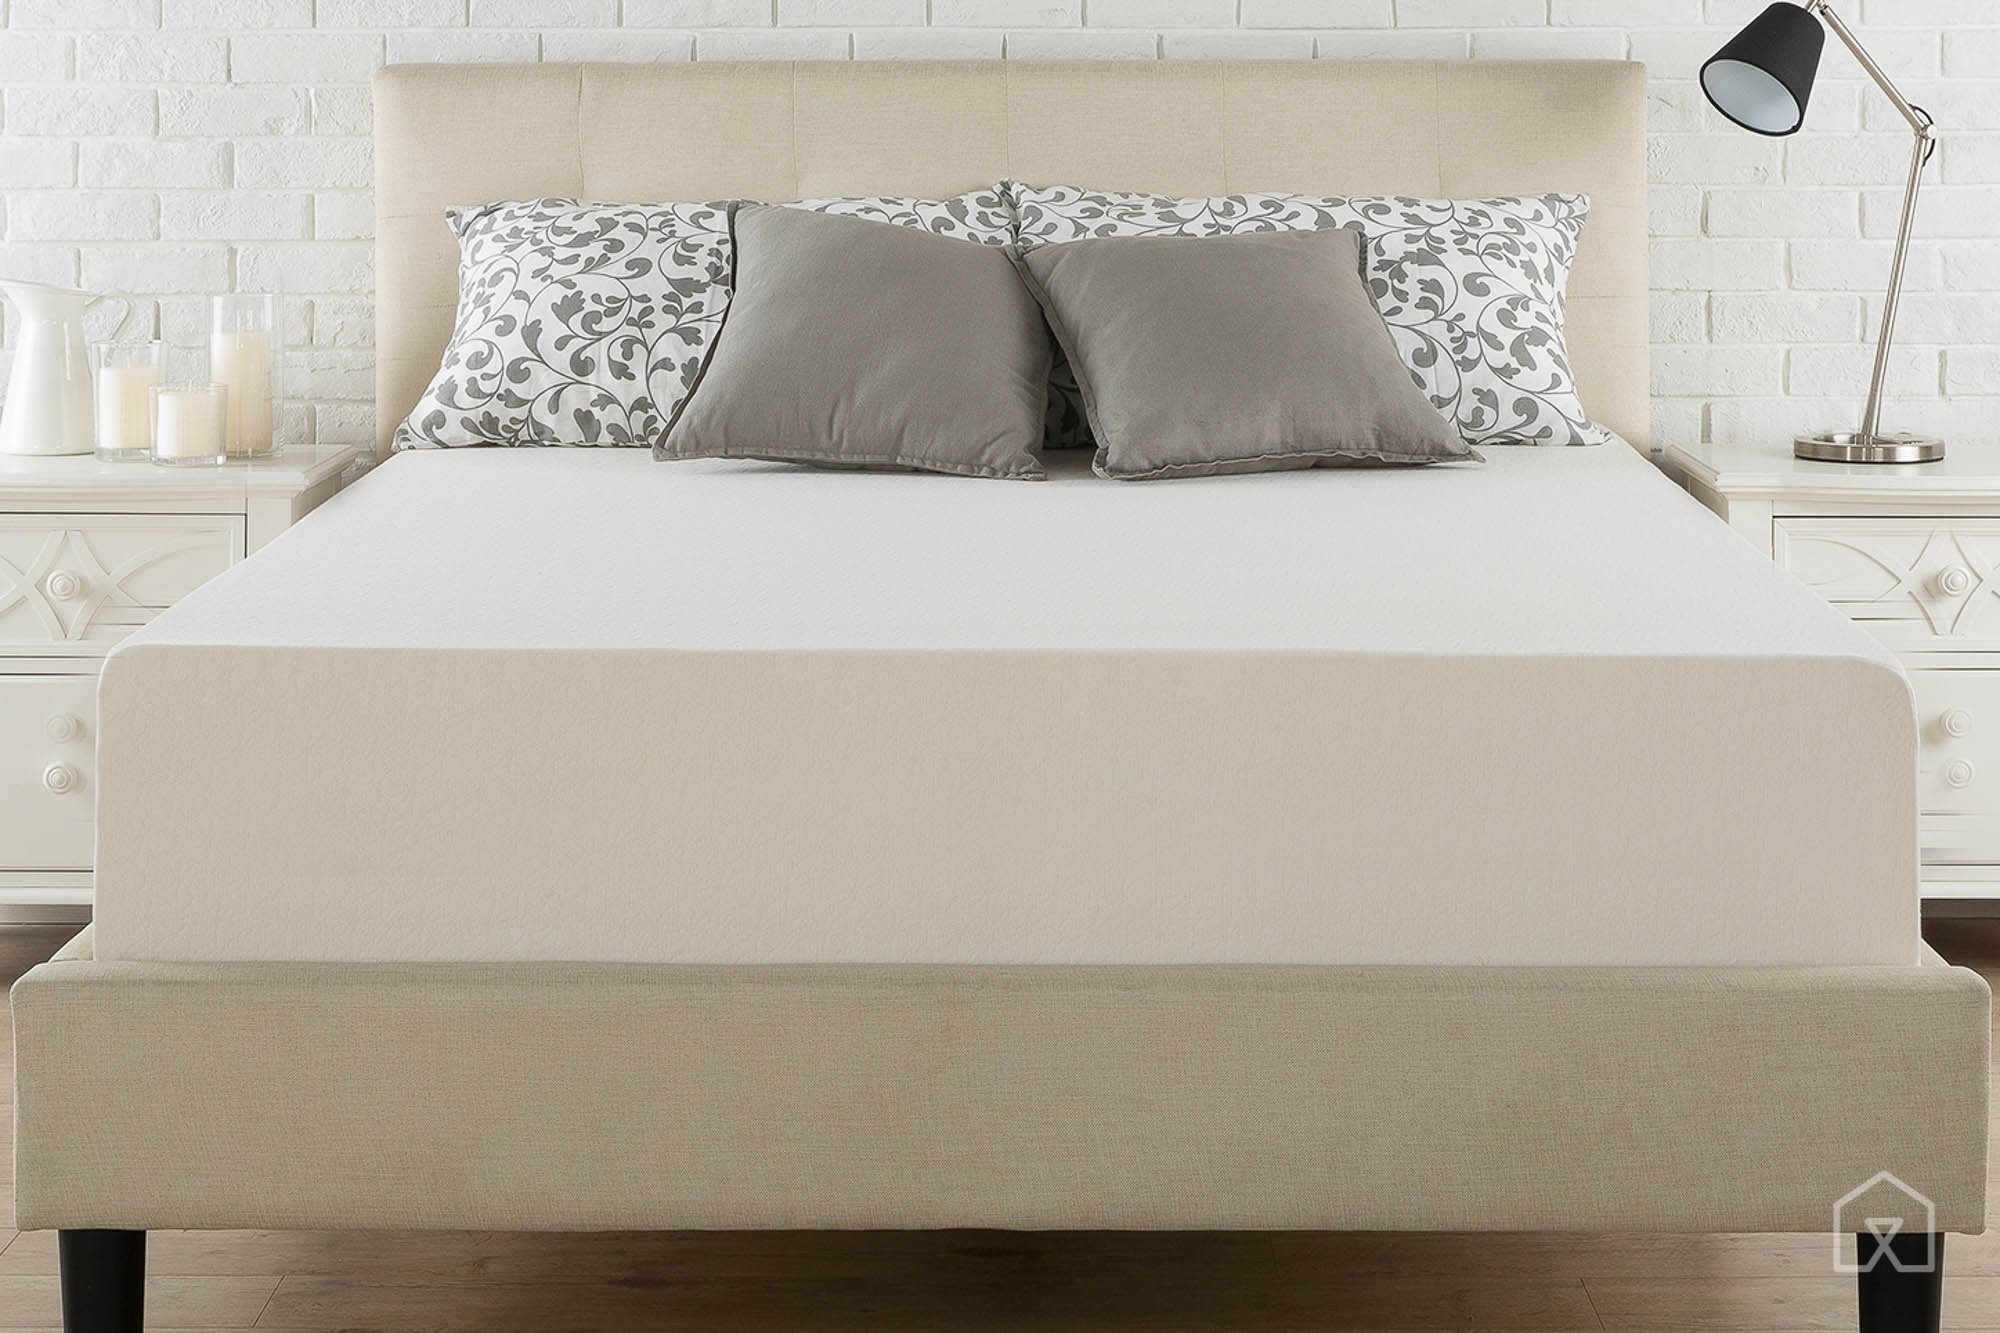 The best foam mattresses you can buy online